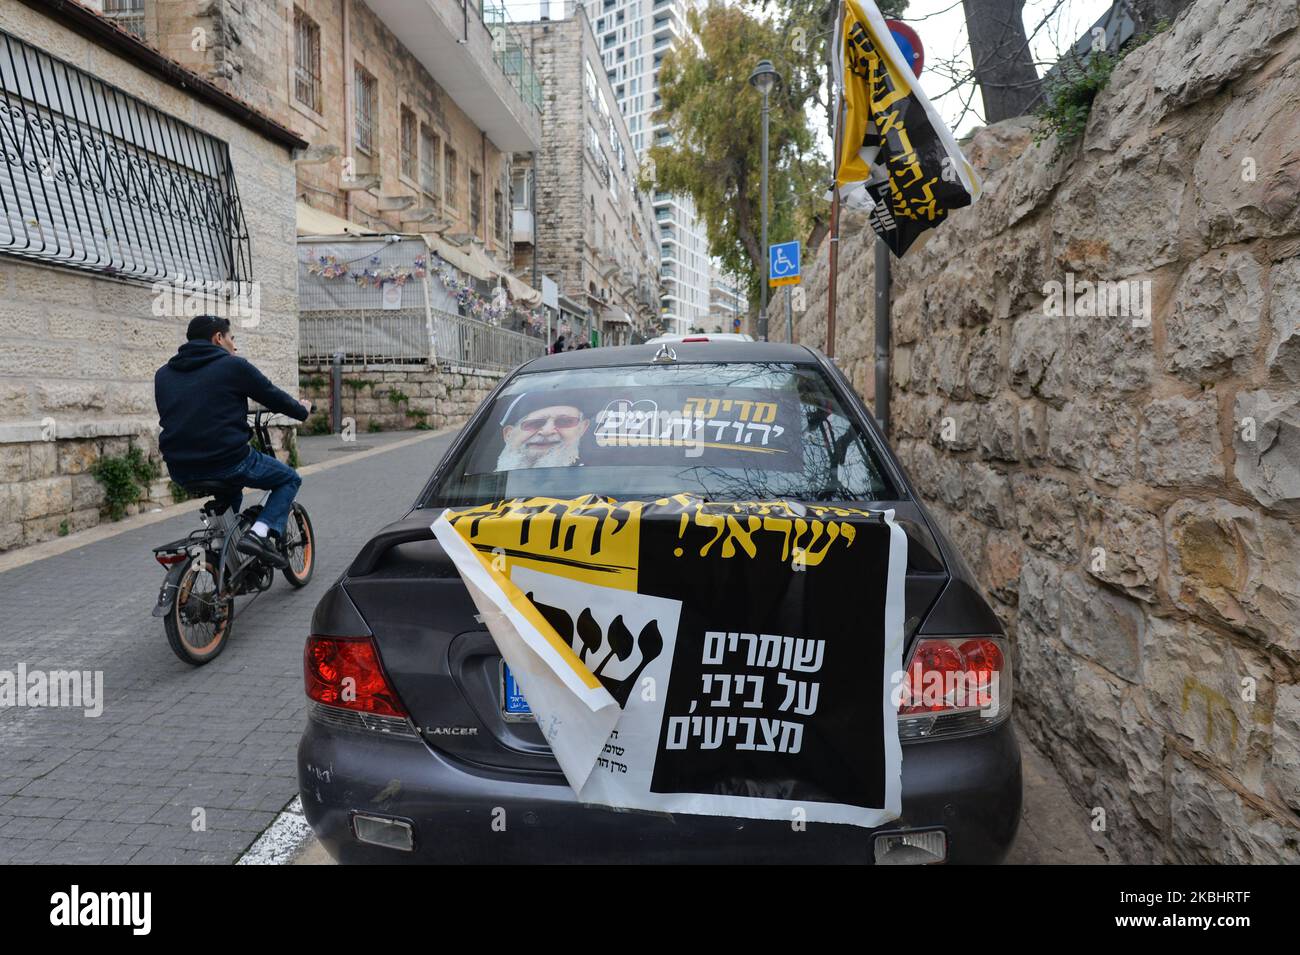 A car covered with election campaign posters for Shas, a Haredi religious political party, in central Jerusalem. Israelis head to the polls for the third election in less than a year on March 2nd. On Monday, February 24, 2020, in Jerusalem, Israel. (Photo by Artur Widak/NurPhoto) Stock Photo